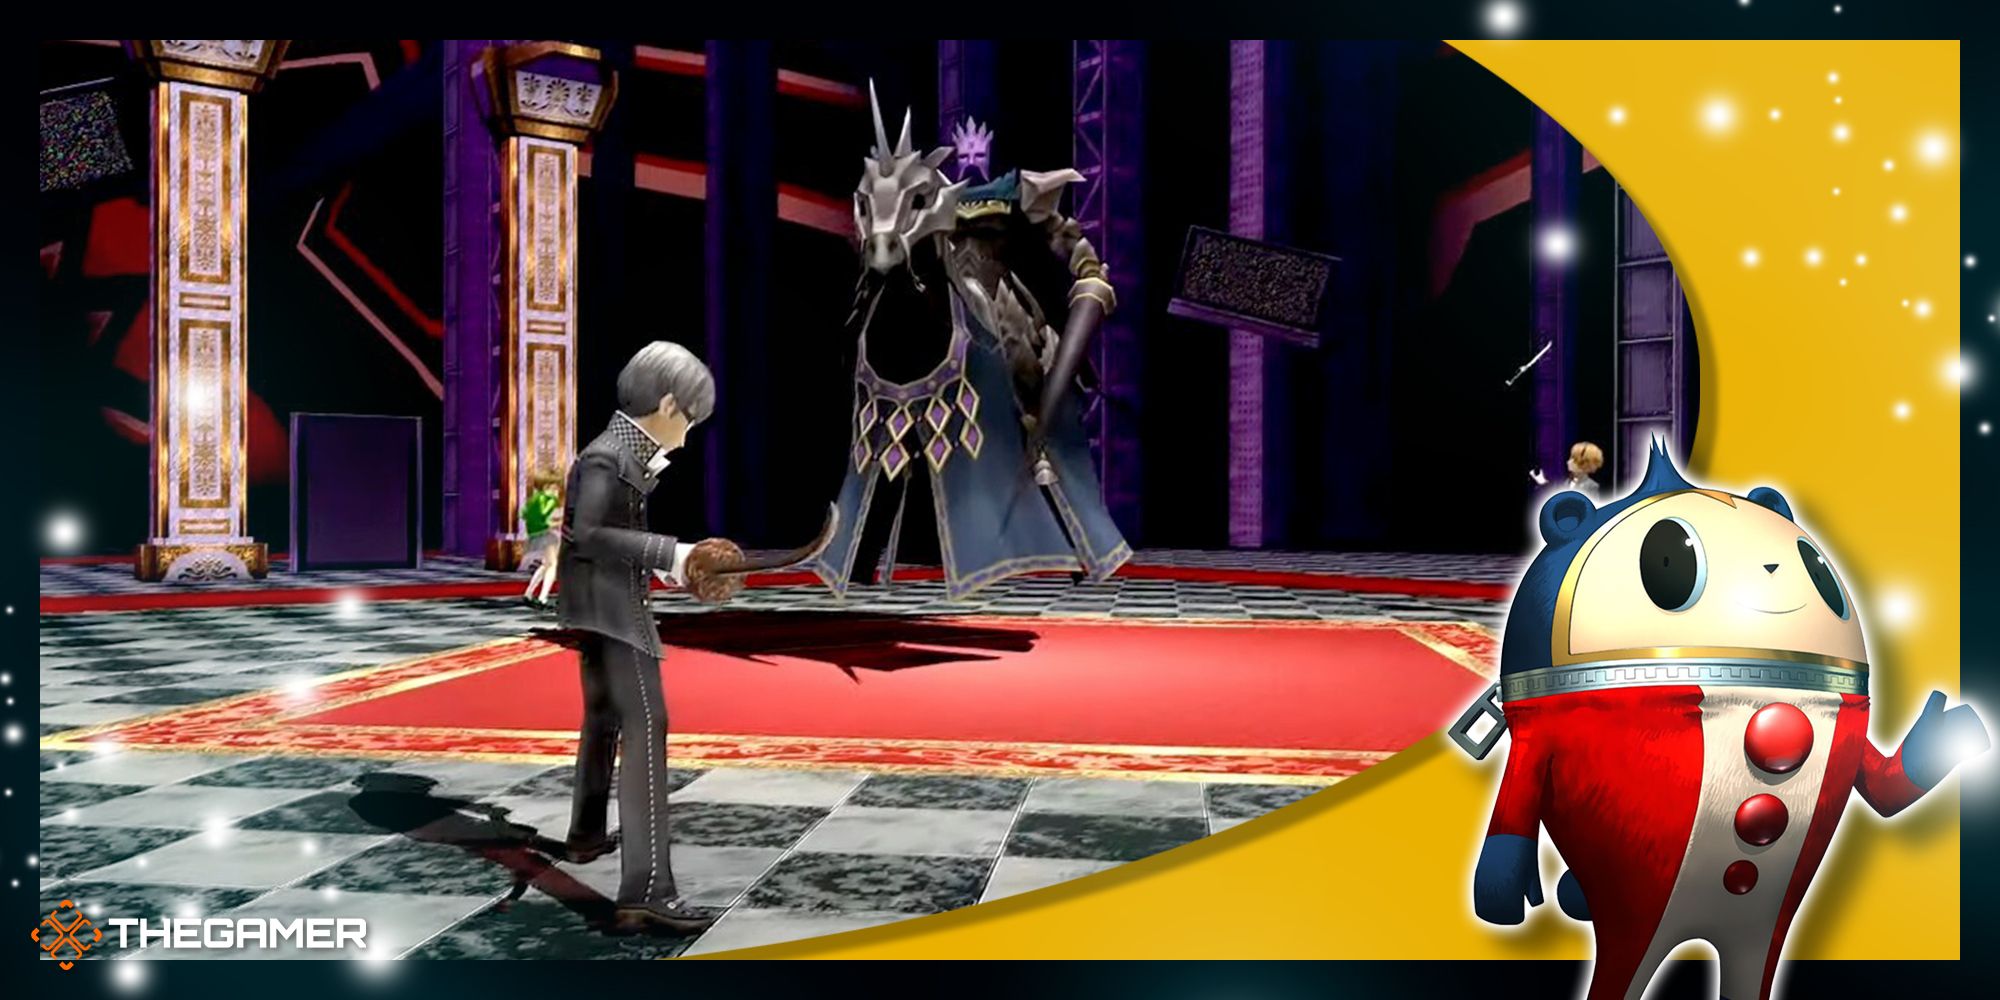 Persona 4 Golden - Yu in battle against Avenger Knight with a Teddie overlay in the corner.